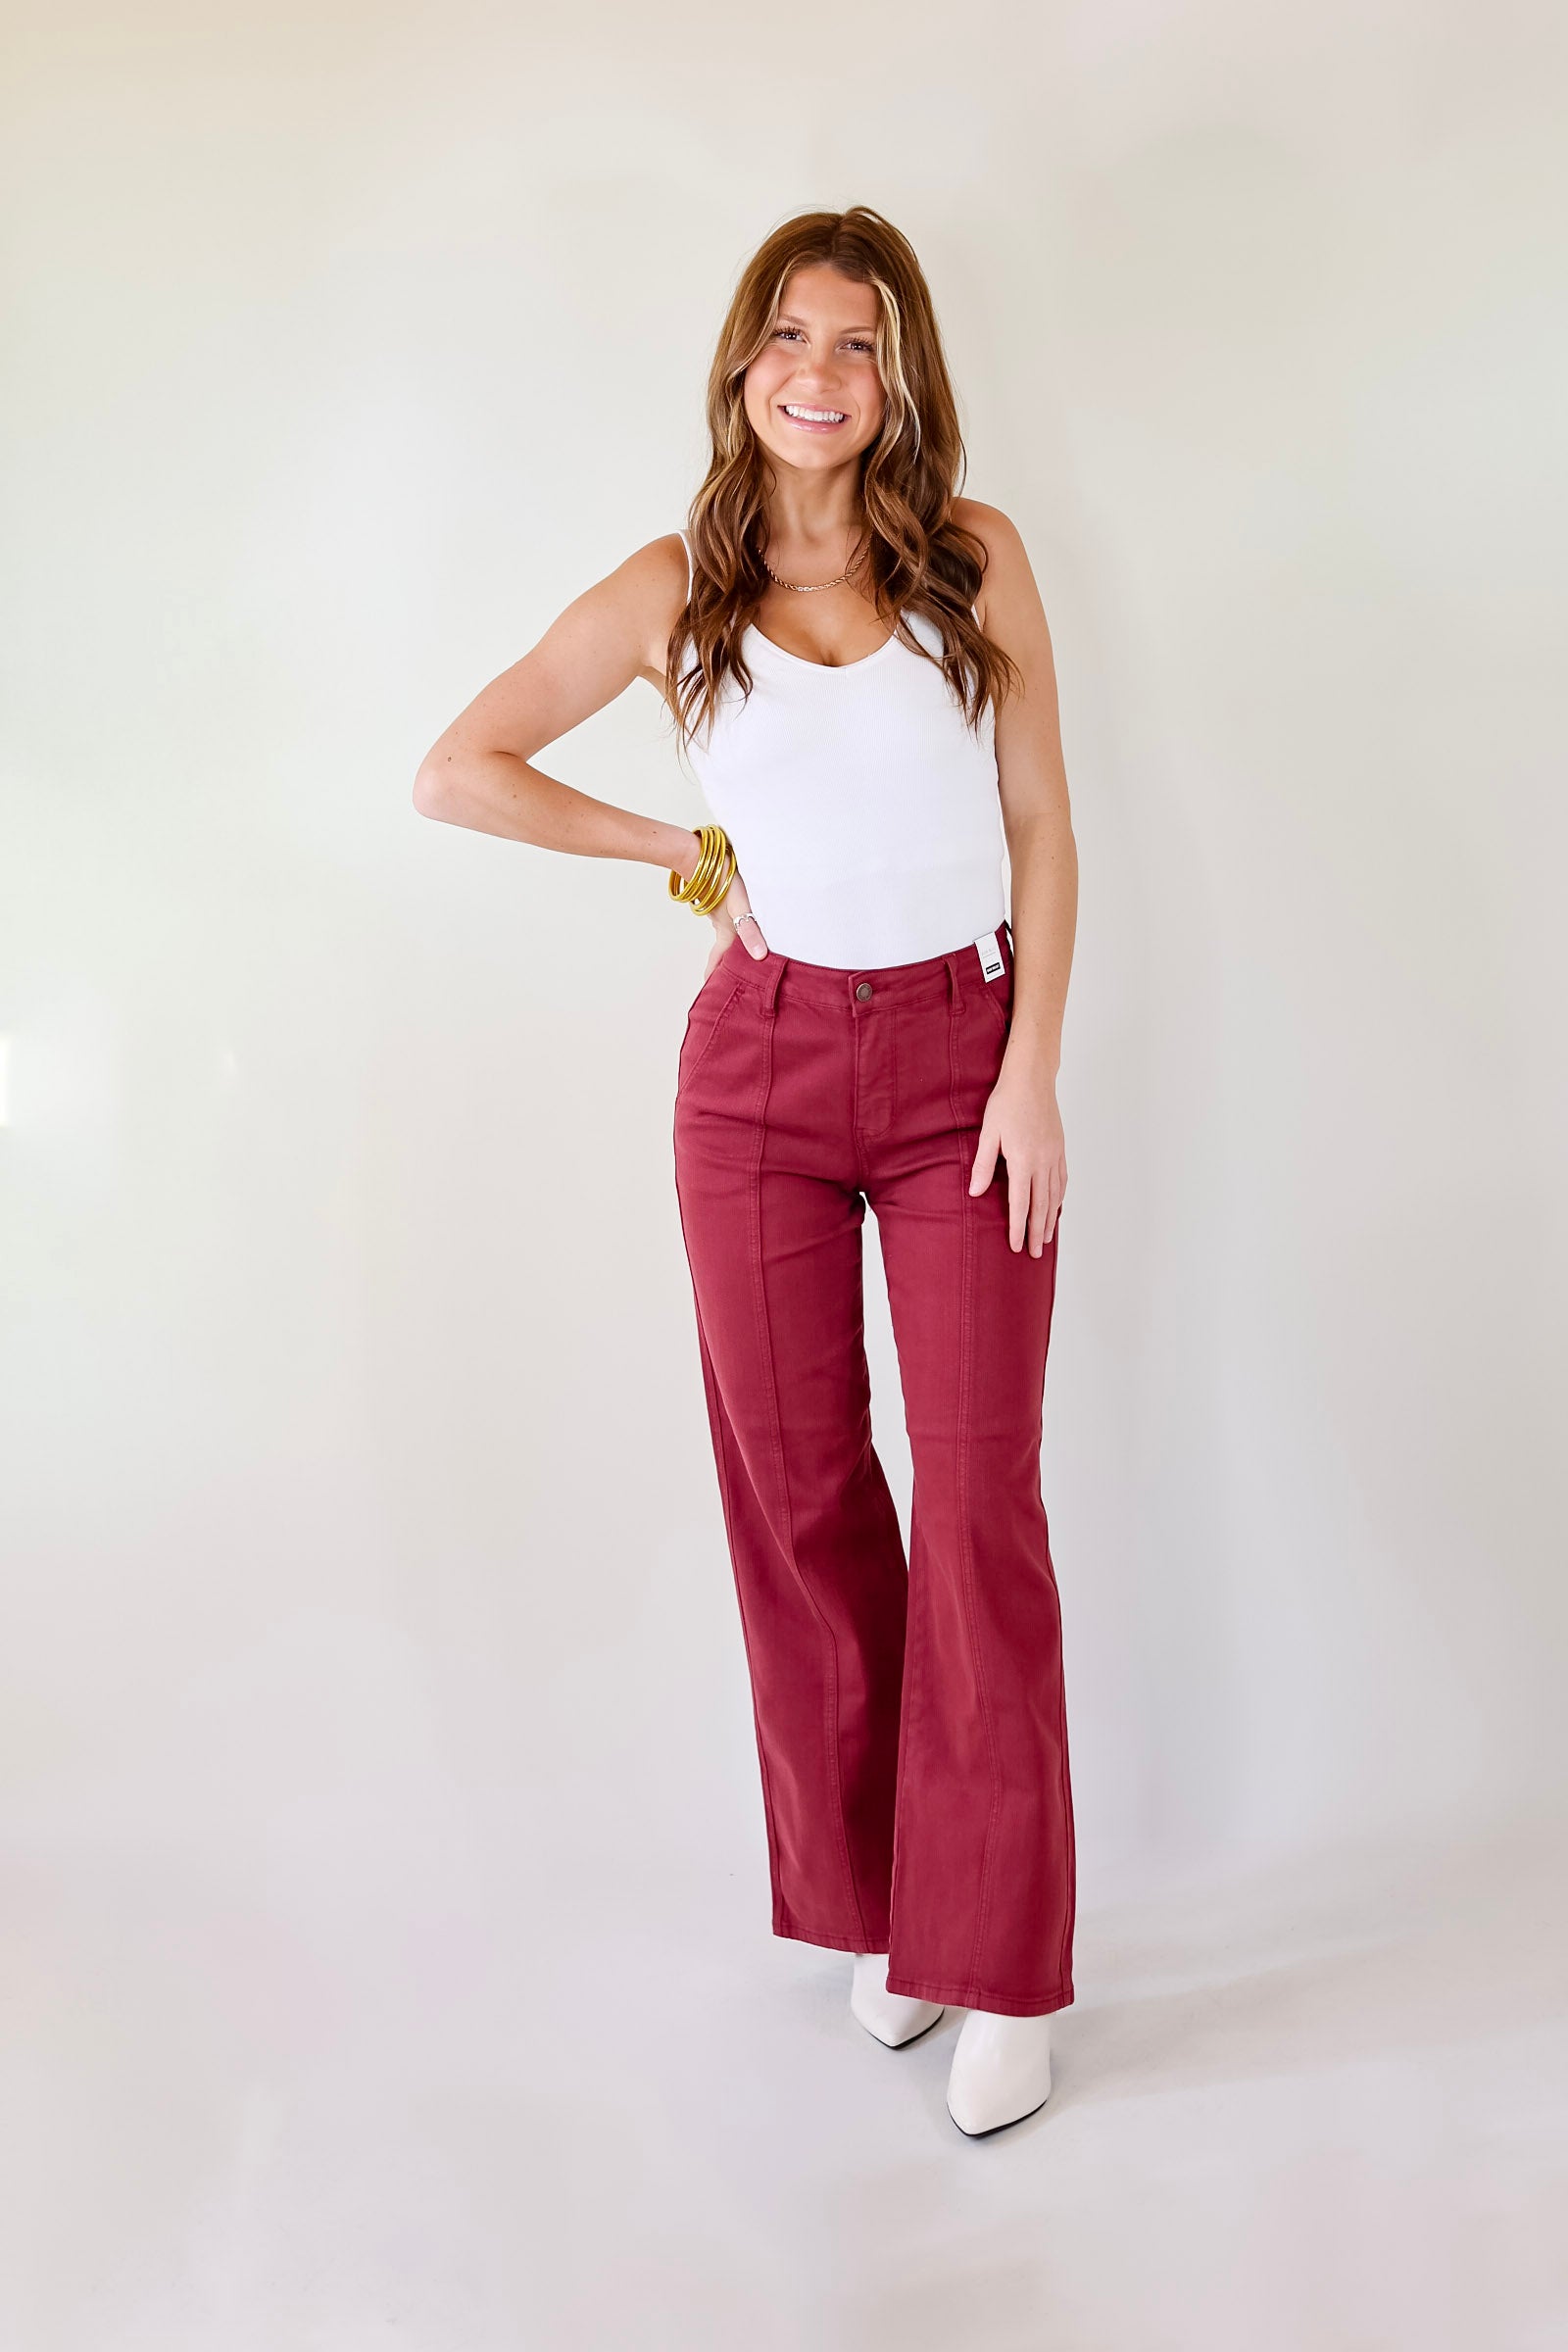 Judy Blue | Day Dreamin' Wide Leg Jeans with Front Seam in Burgundy Red - Giddy Up Glamour Boutique